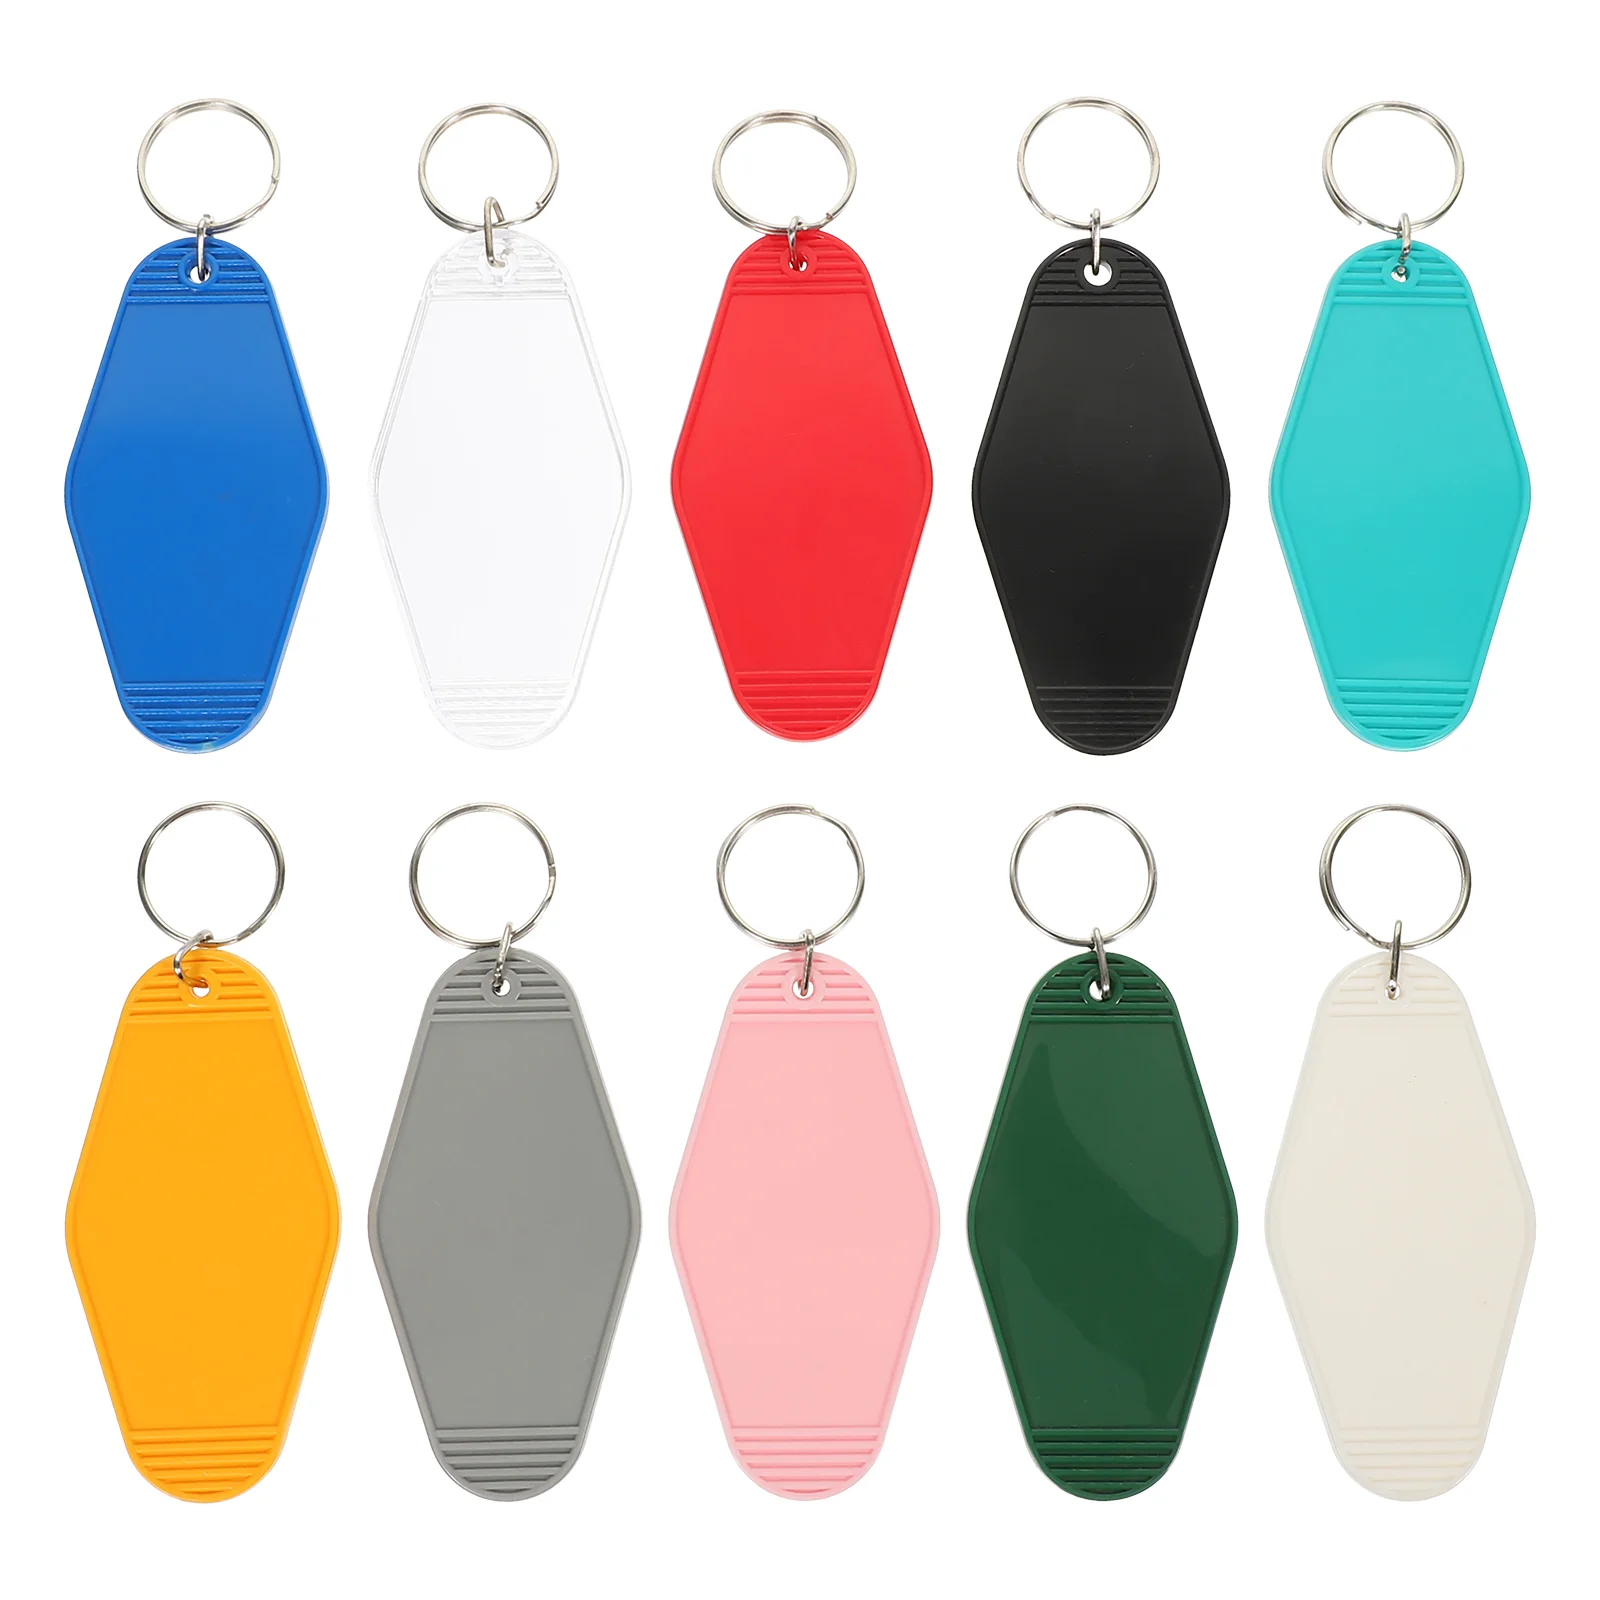 

Tags Key Tag Keychain Label Luggage Id Ring Blank Motel Chain Labels Identifiers Hotel Name Suitcase Identification Keyrings